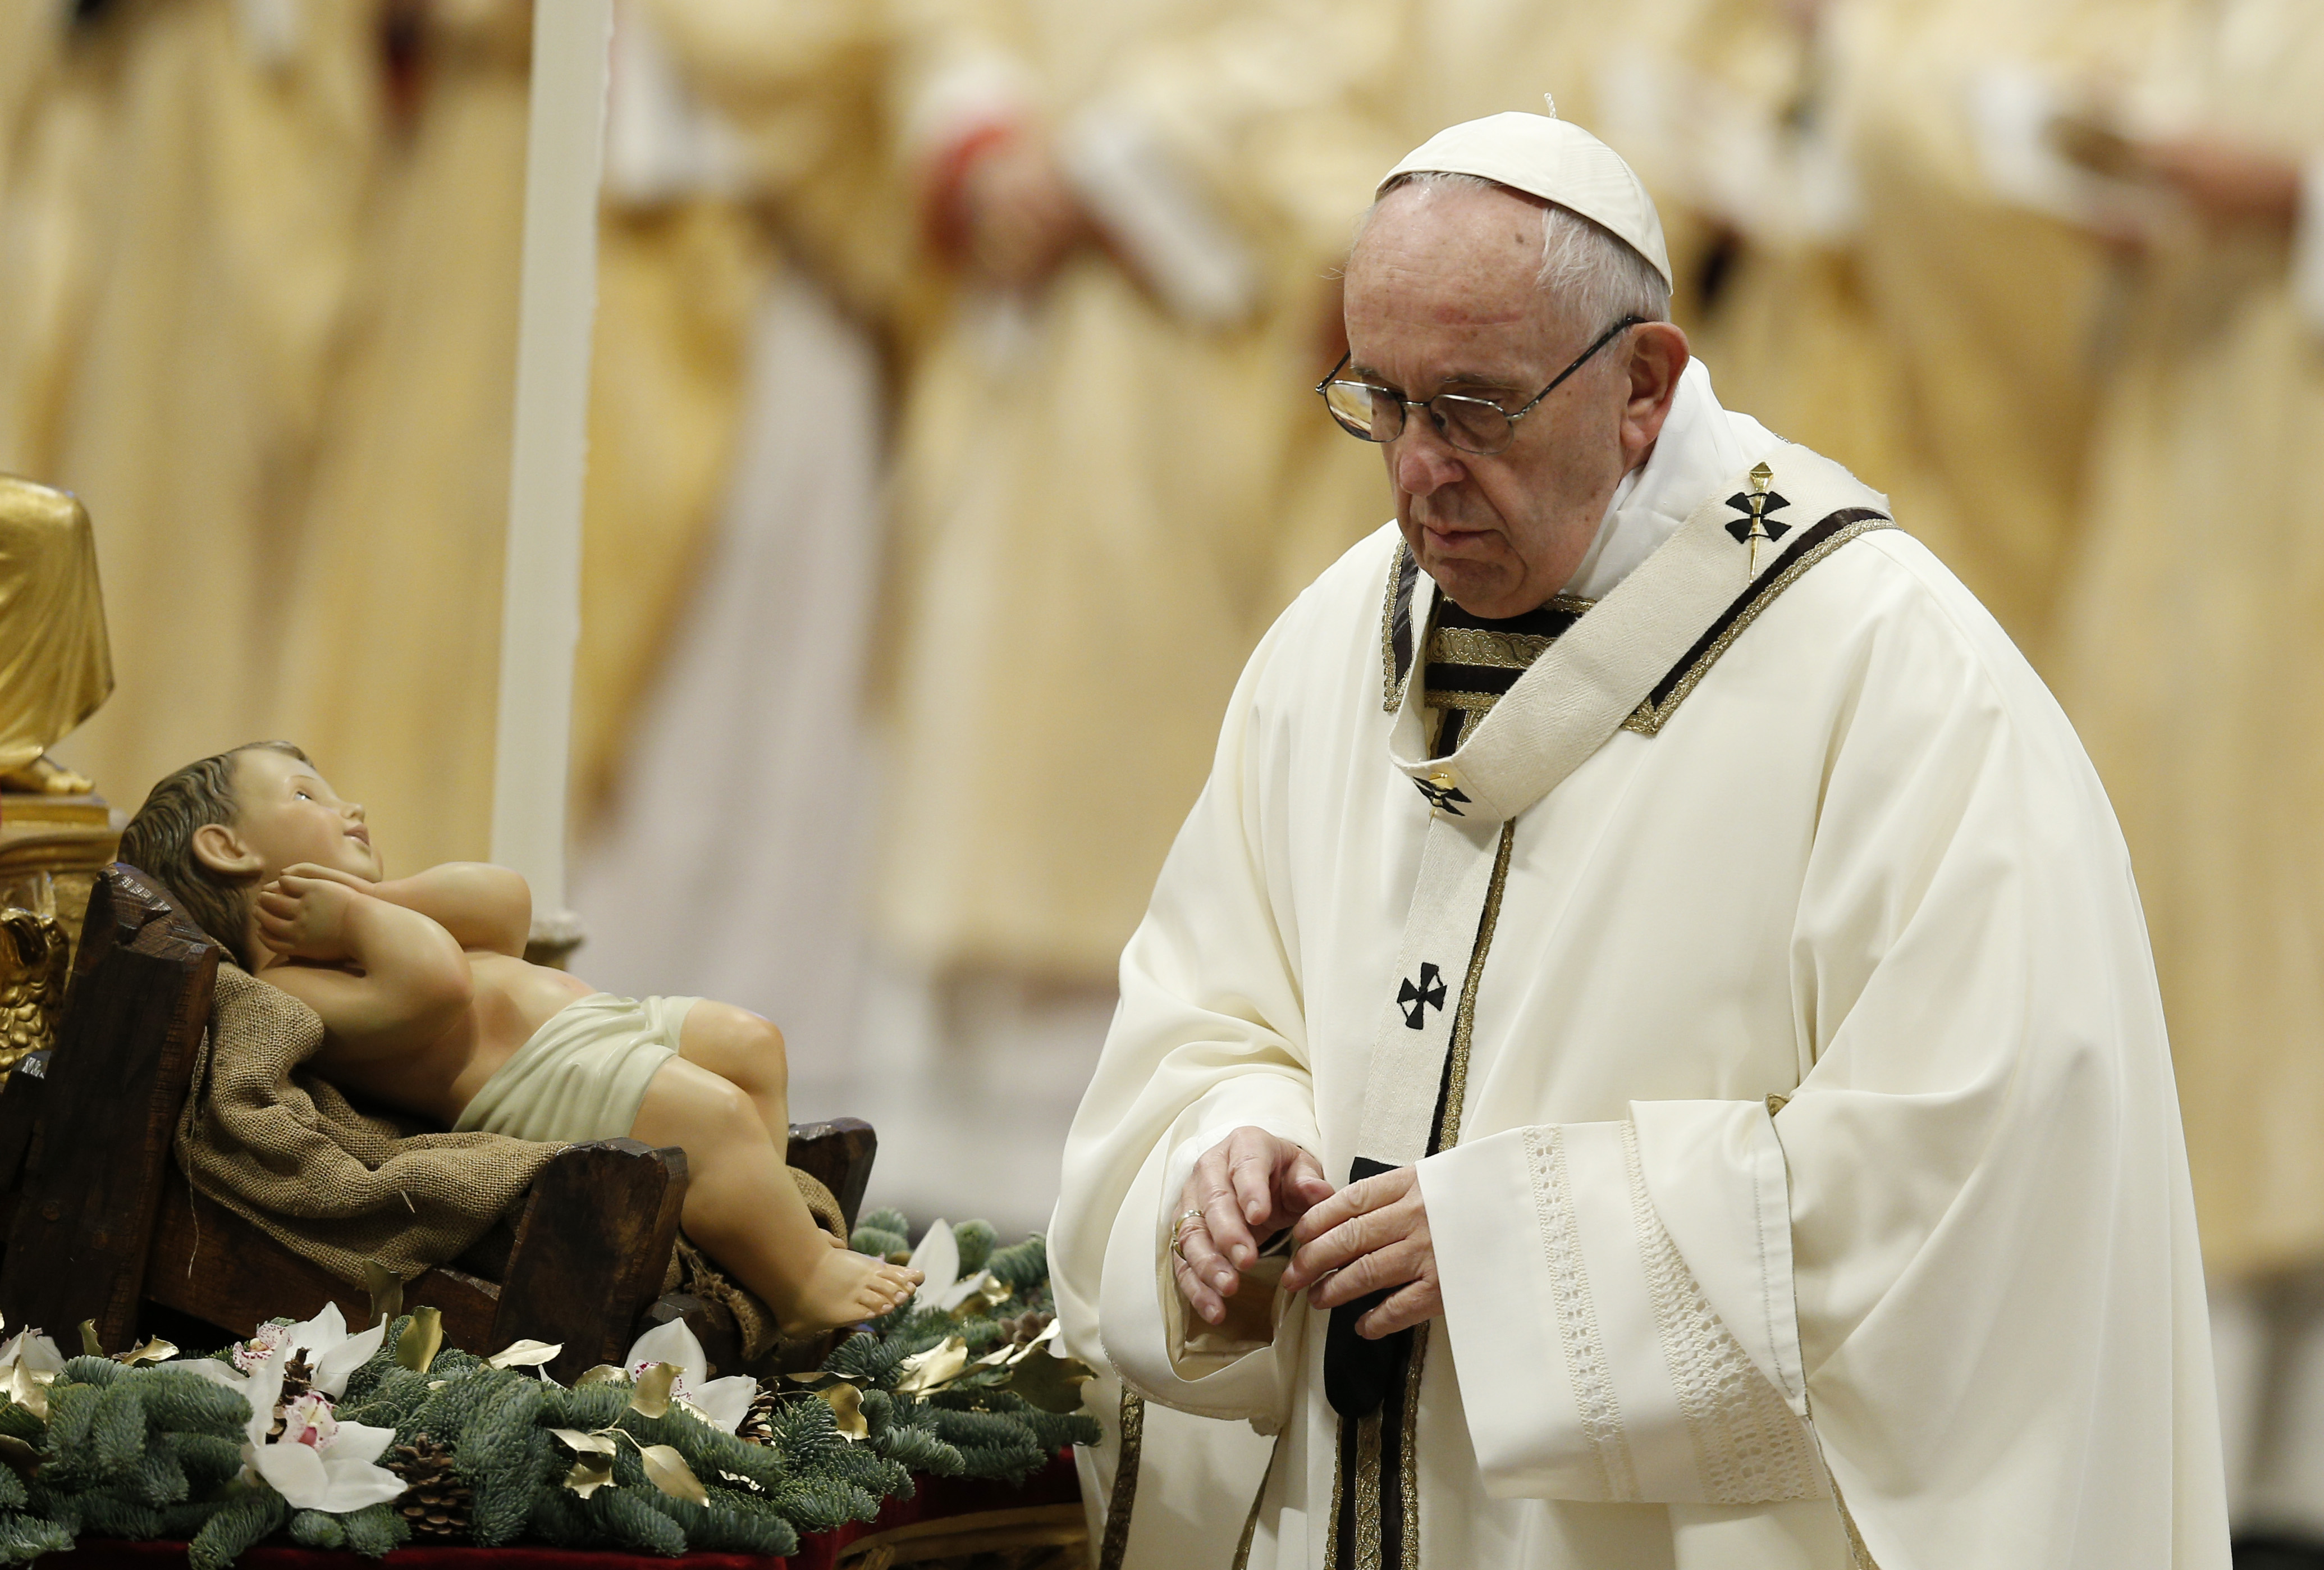 Seek Jesus, adore him and serve him and others, pope says on Epiphany